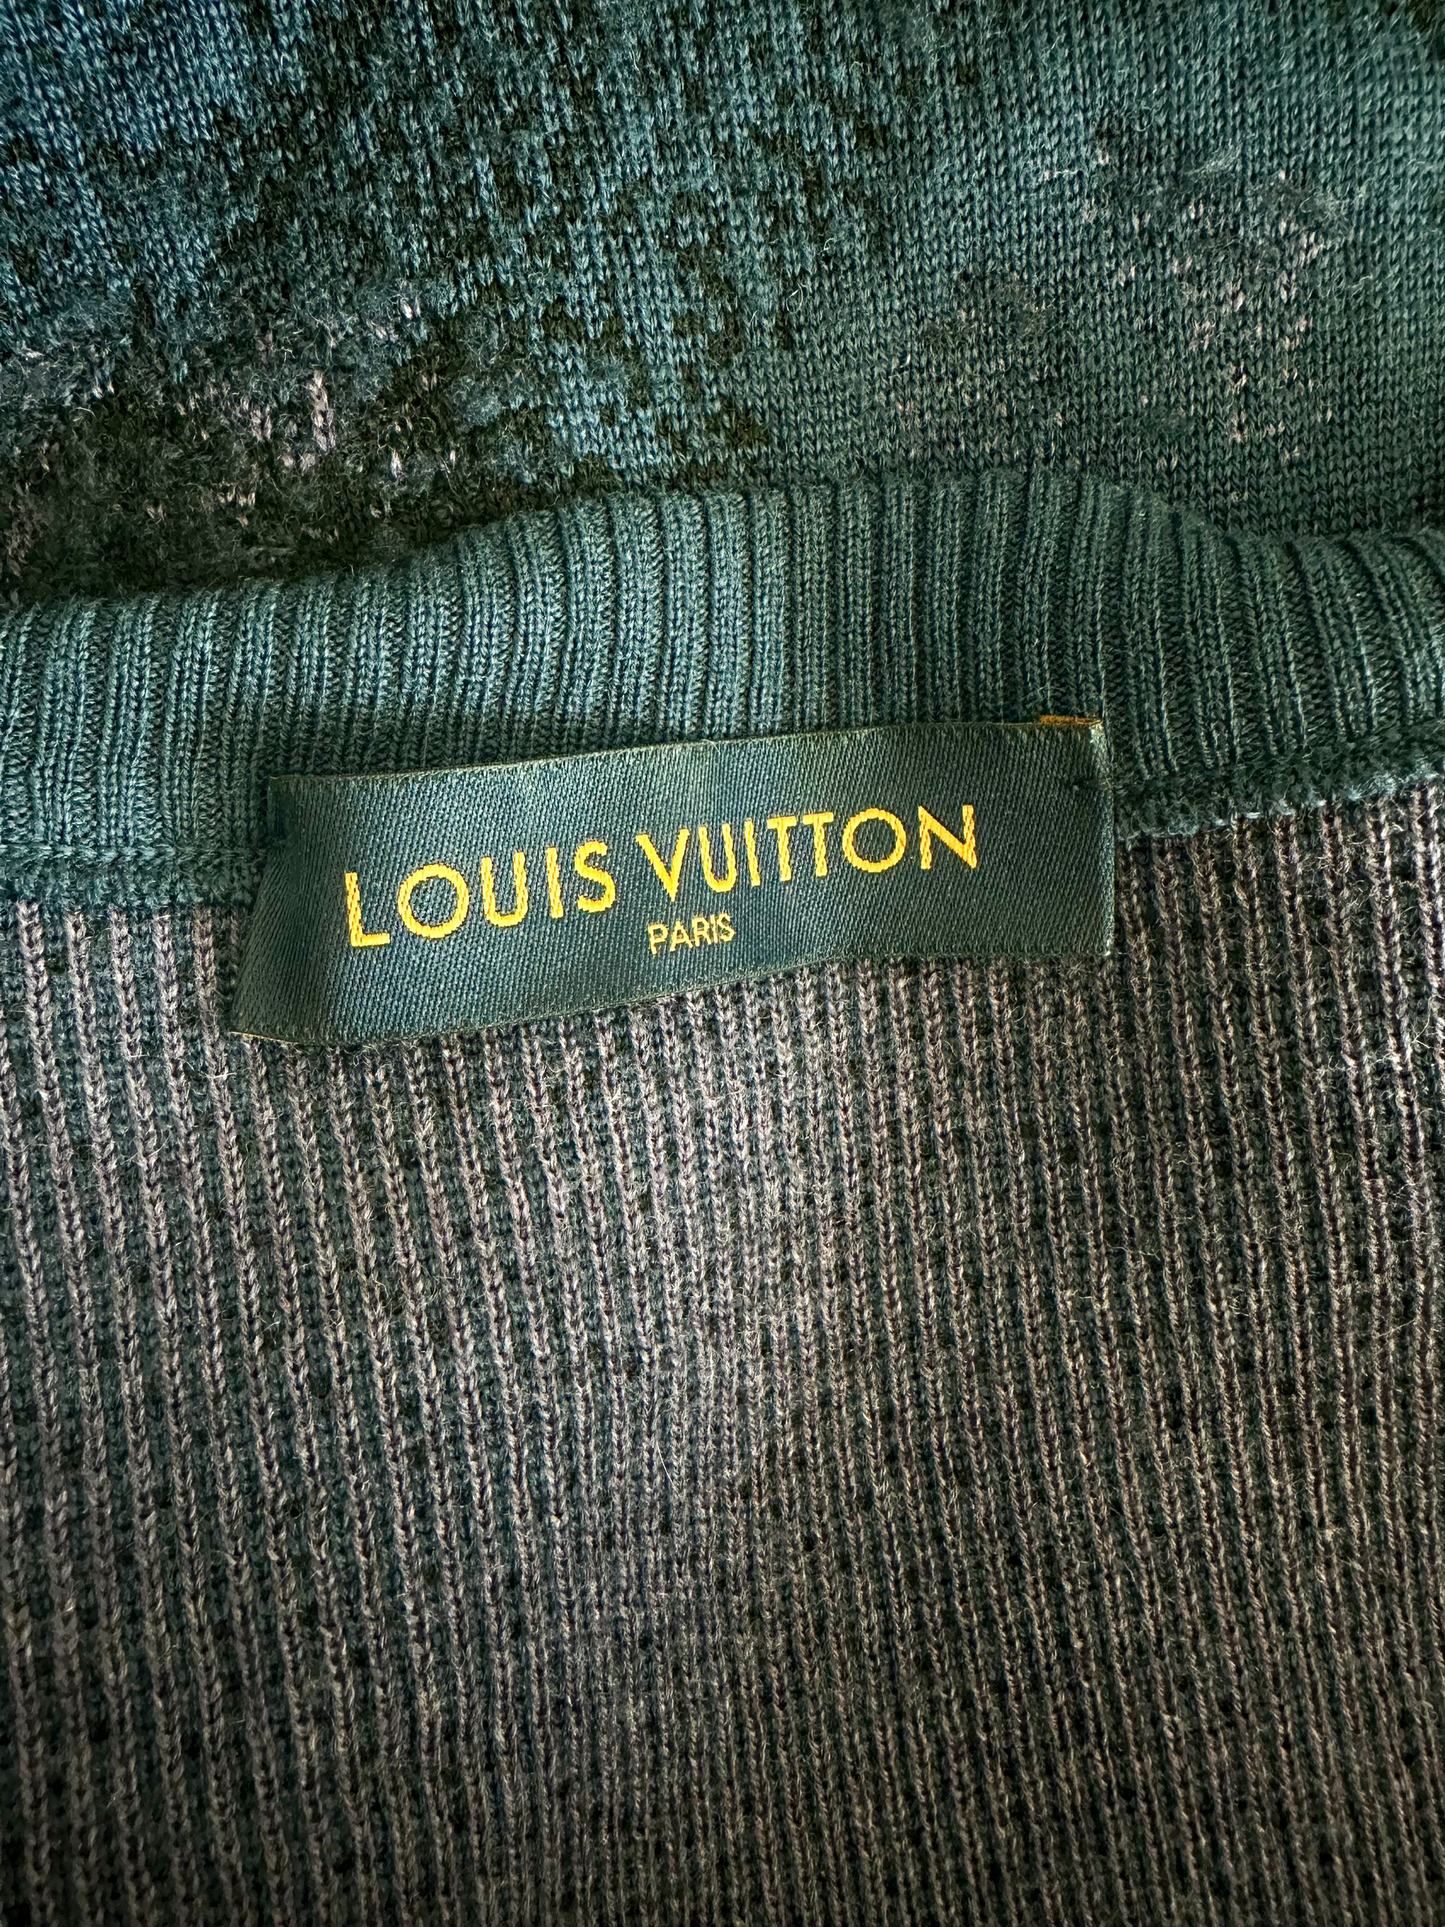 Louis Vuitton Yellow Brick Road Sweater - Blue Sweaters, Clothing -  LOU229826